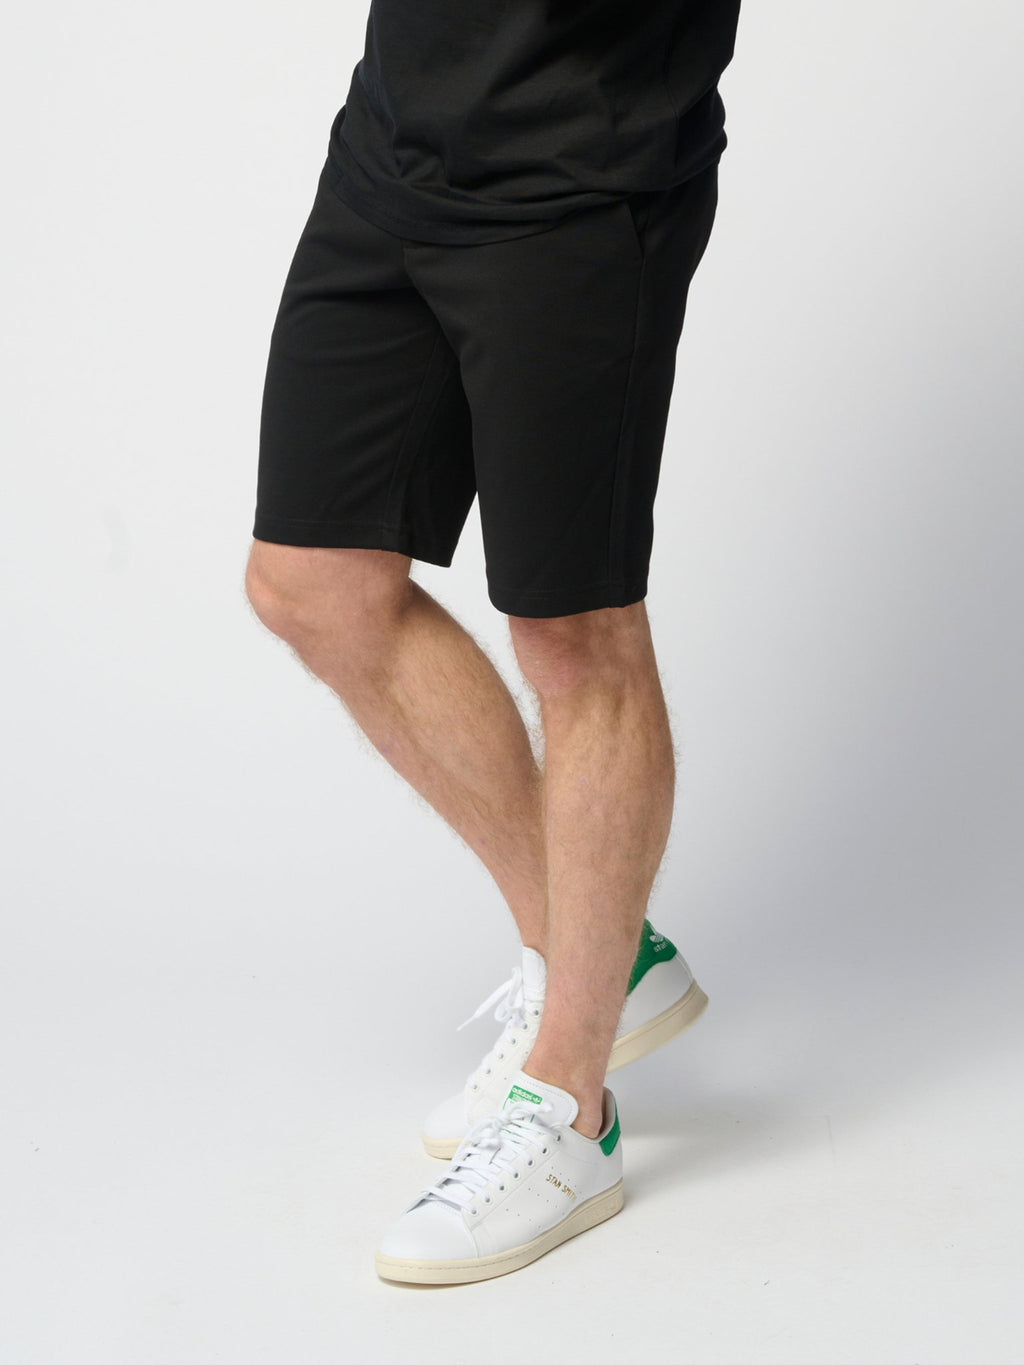 Performance Pants & 2 Performance Shorts - Package Deal